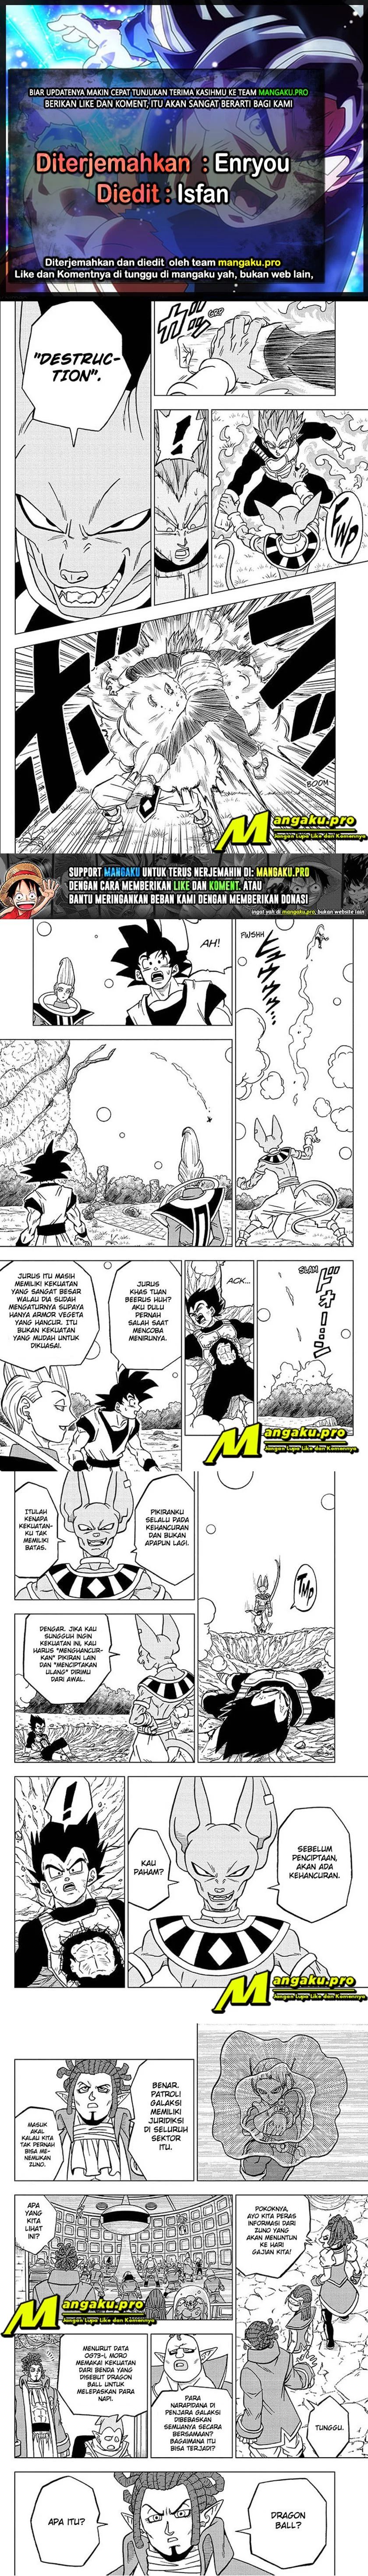 Dragon Ball Super: Chapter 69.2 - Page 1